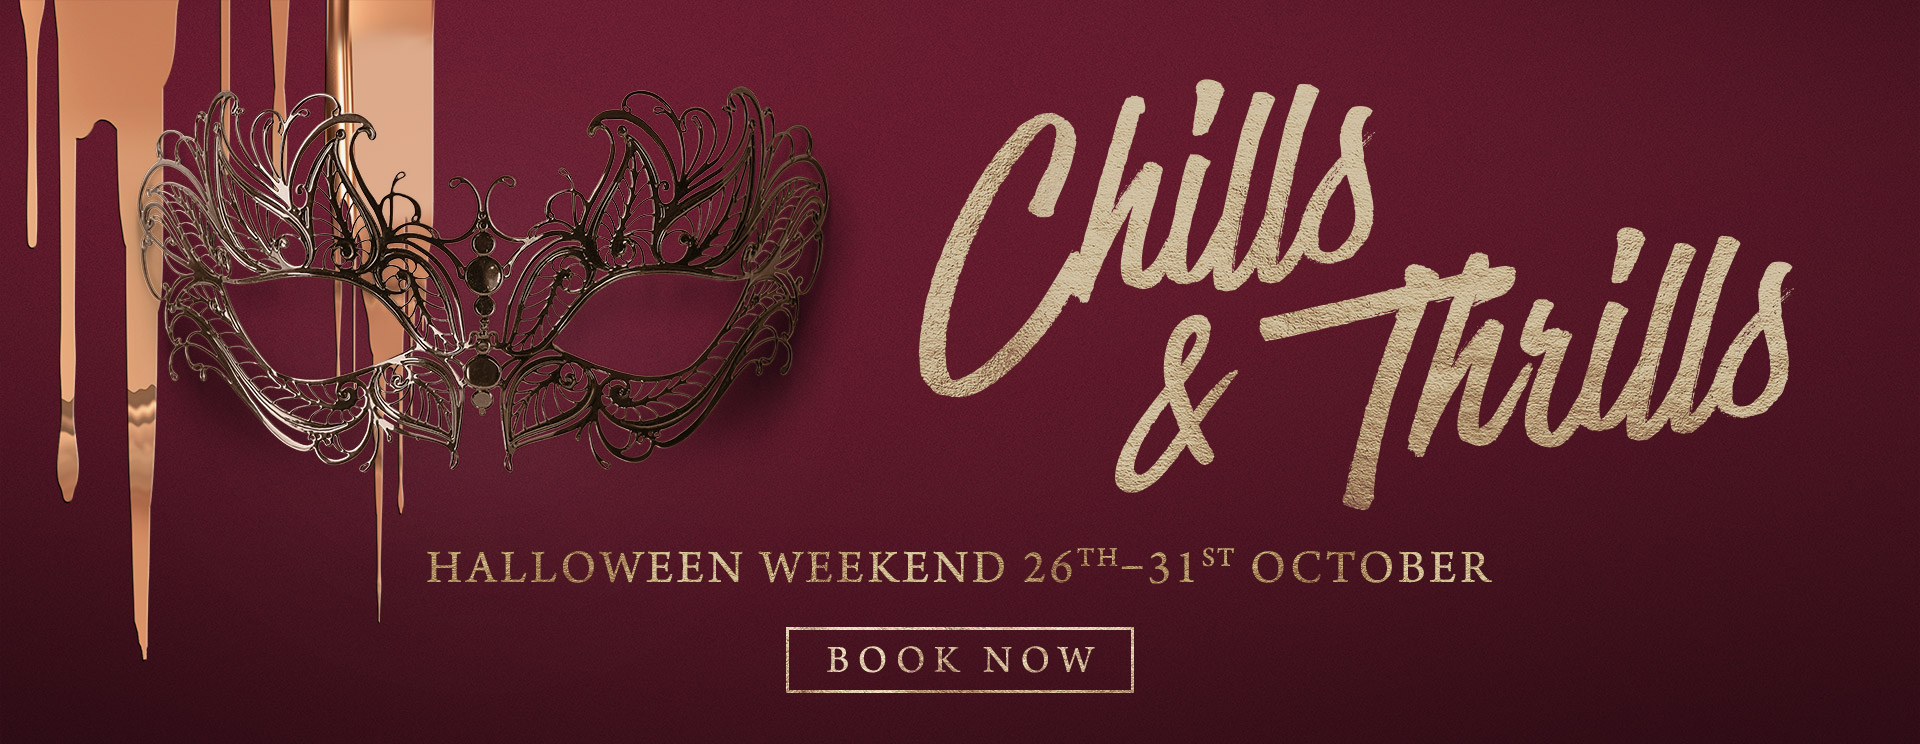 Chills & Thrills this Halloween at The King's Arms